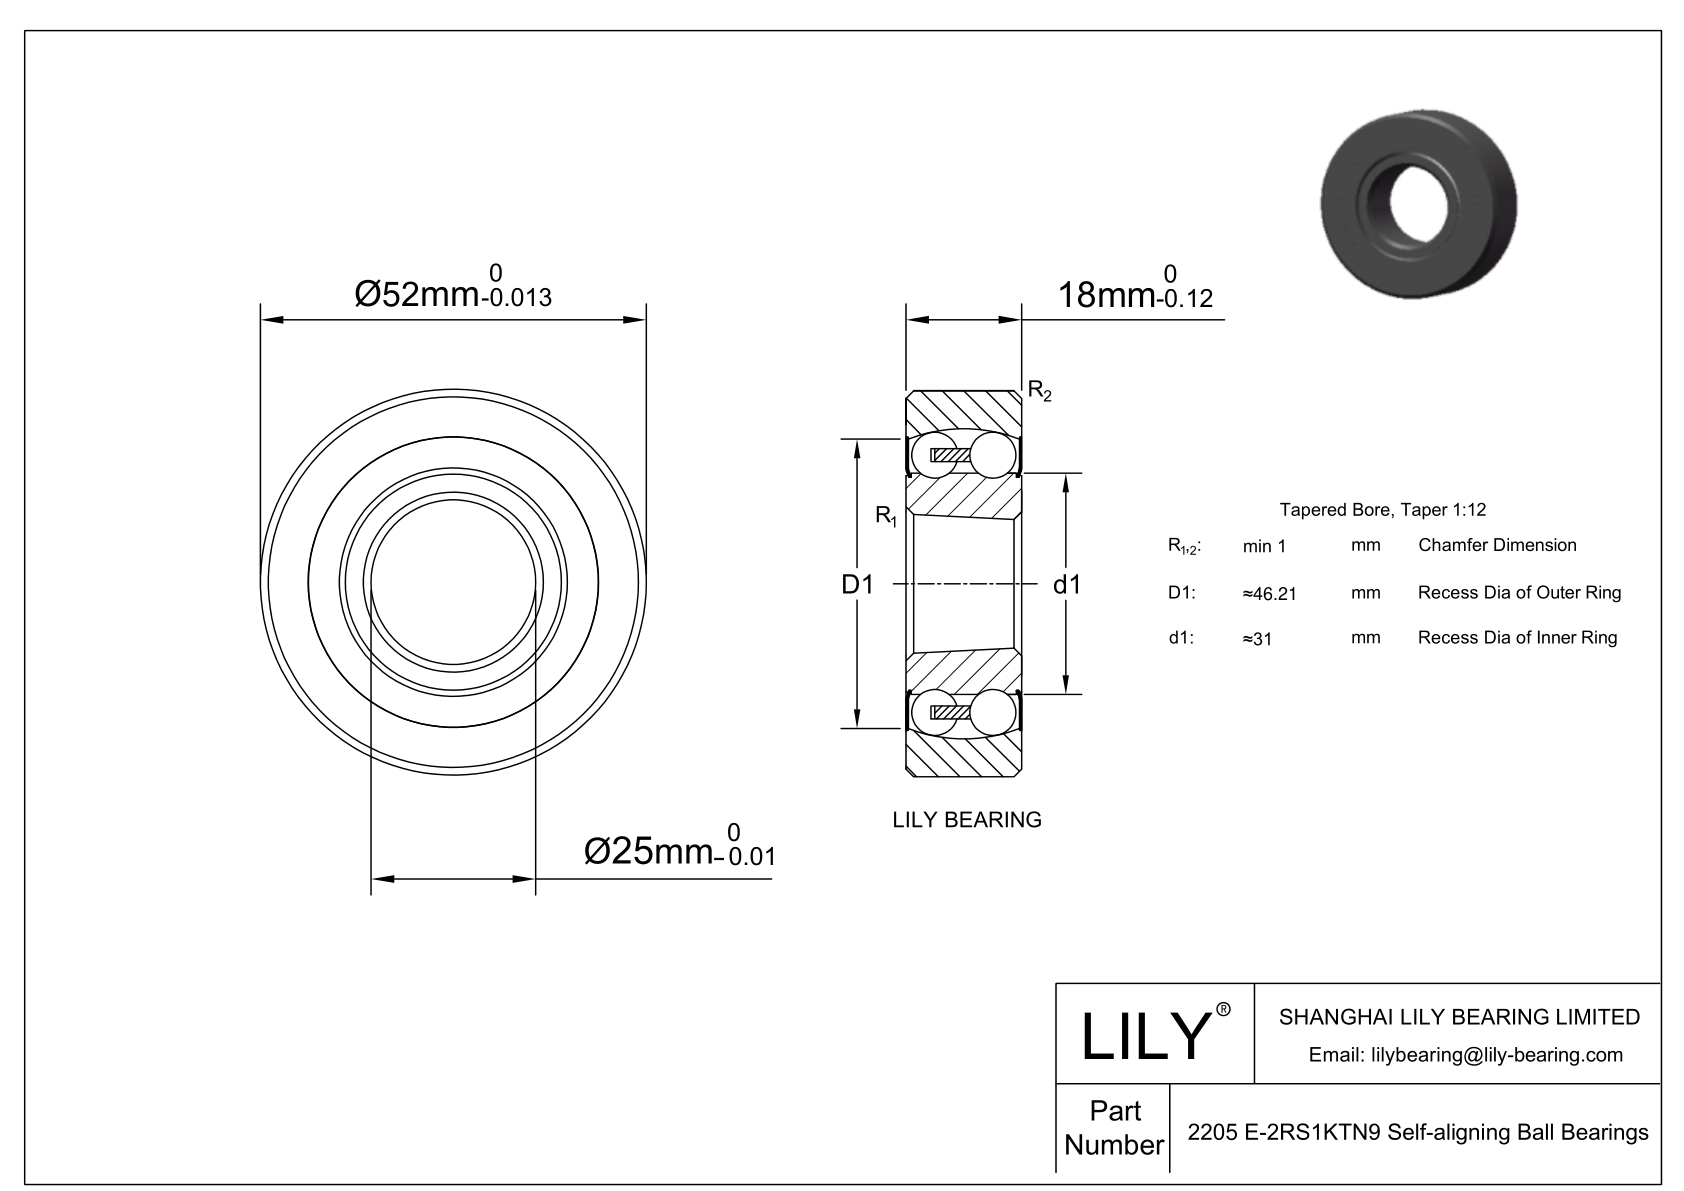 CE2205 E-SIPP Silicon Nitride Self Aligning Ball Bearings cad drawing